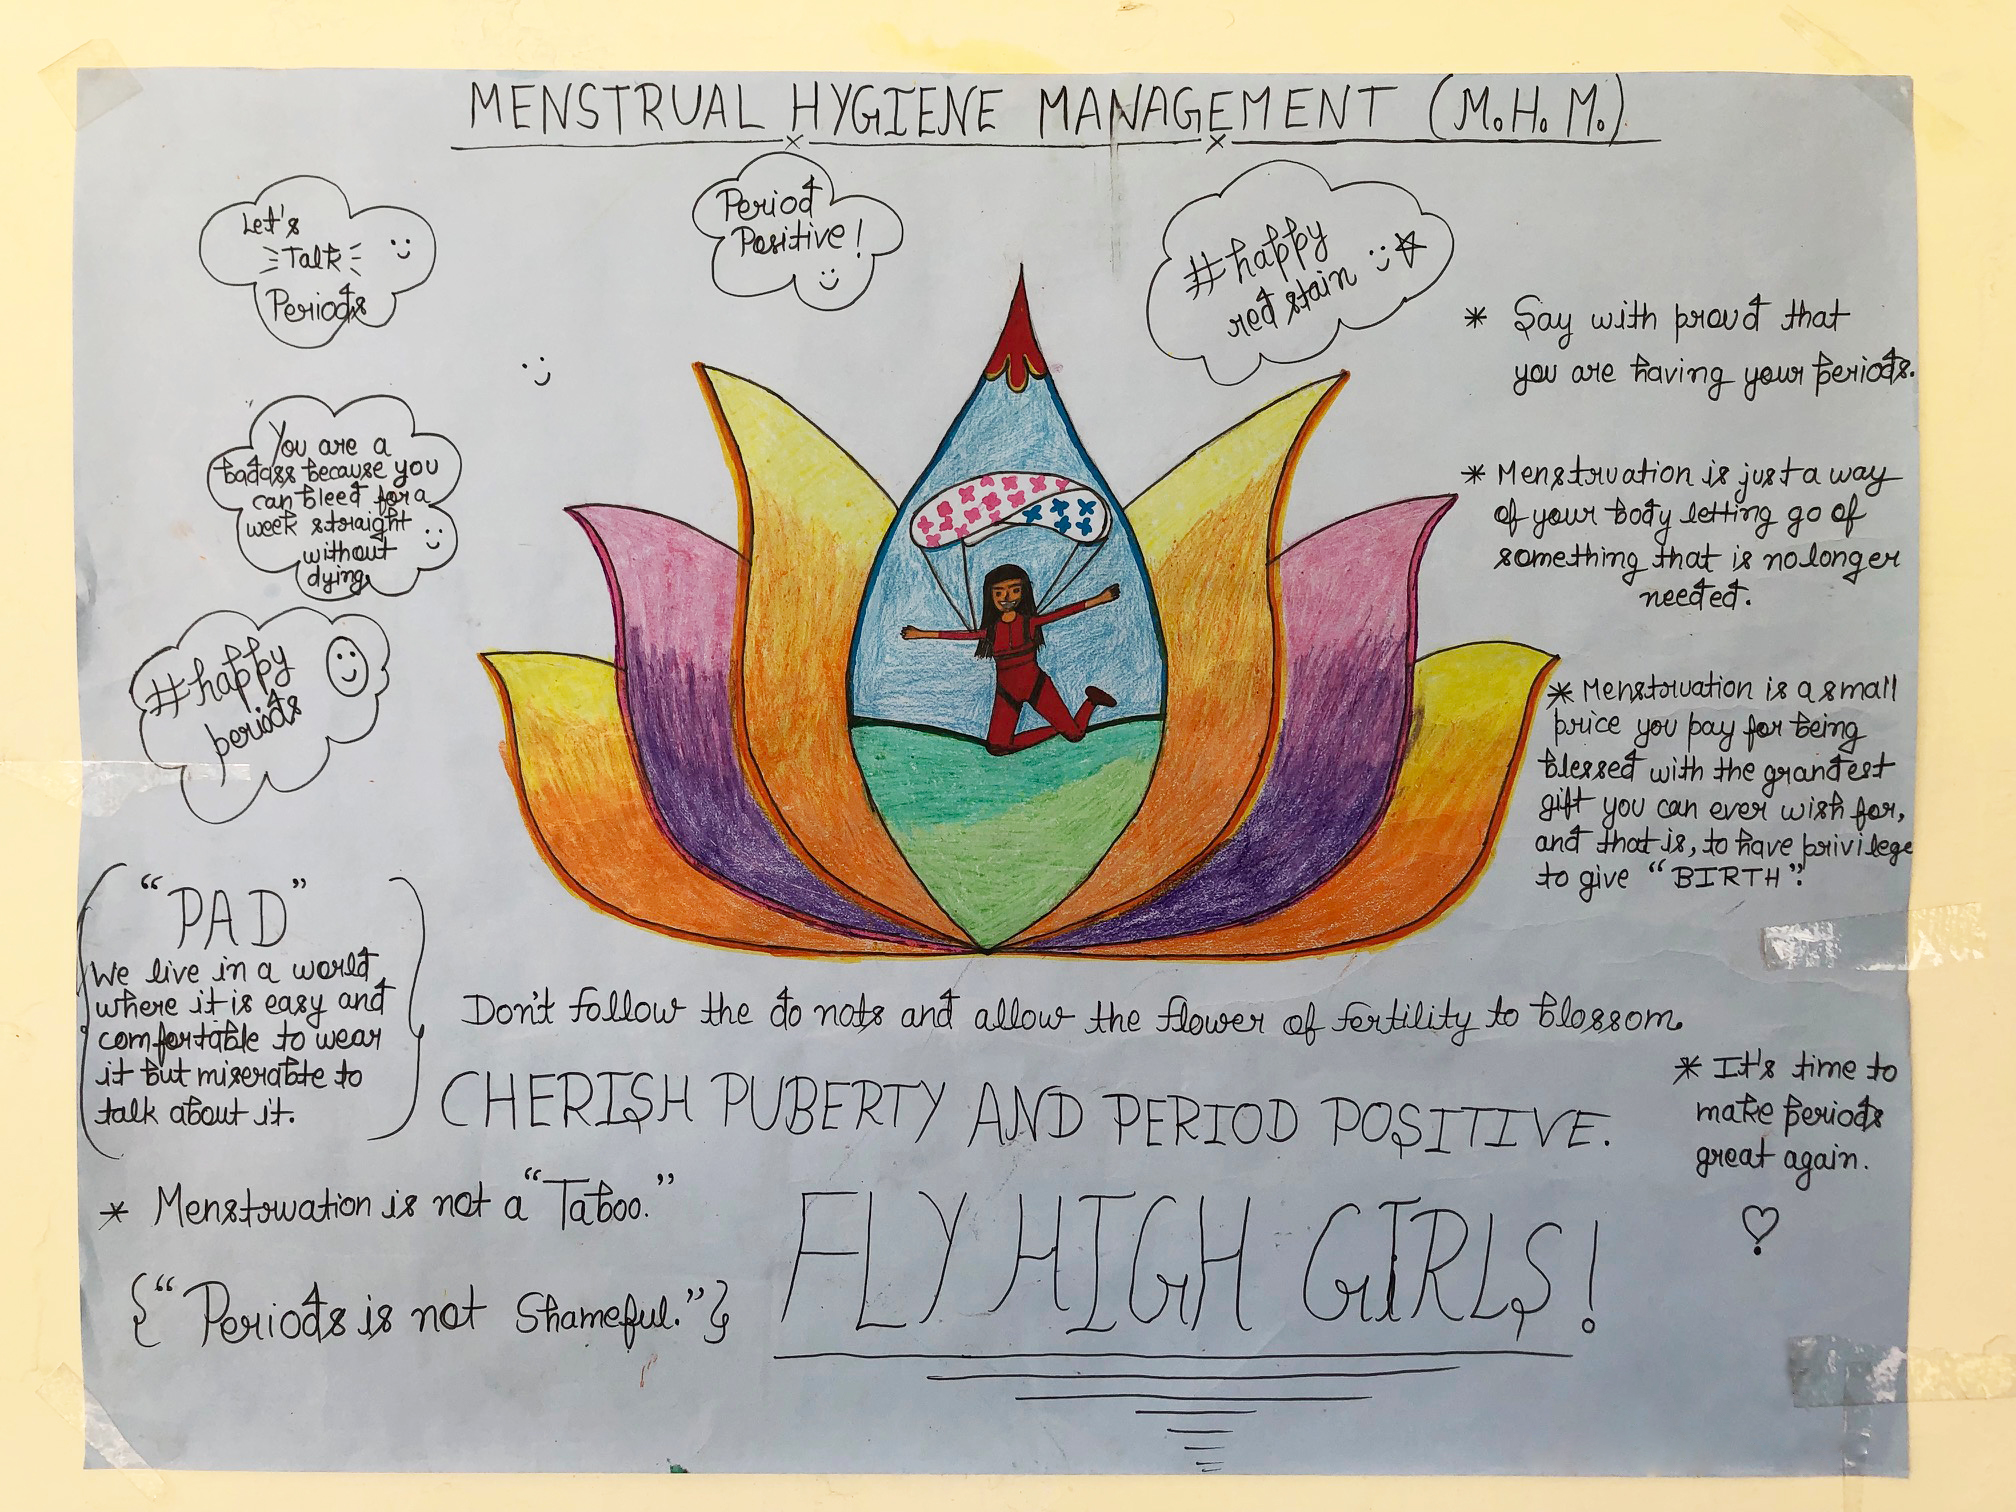 A drawing of a lotus flower is painted different colours. It contains different messages on menstrual health management.